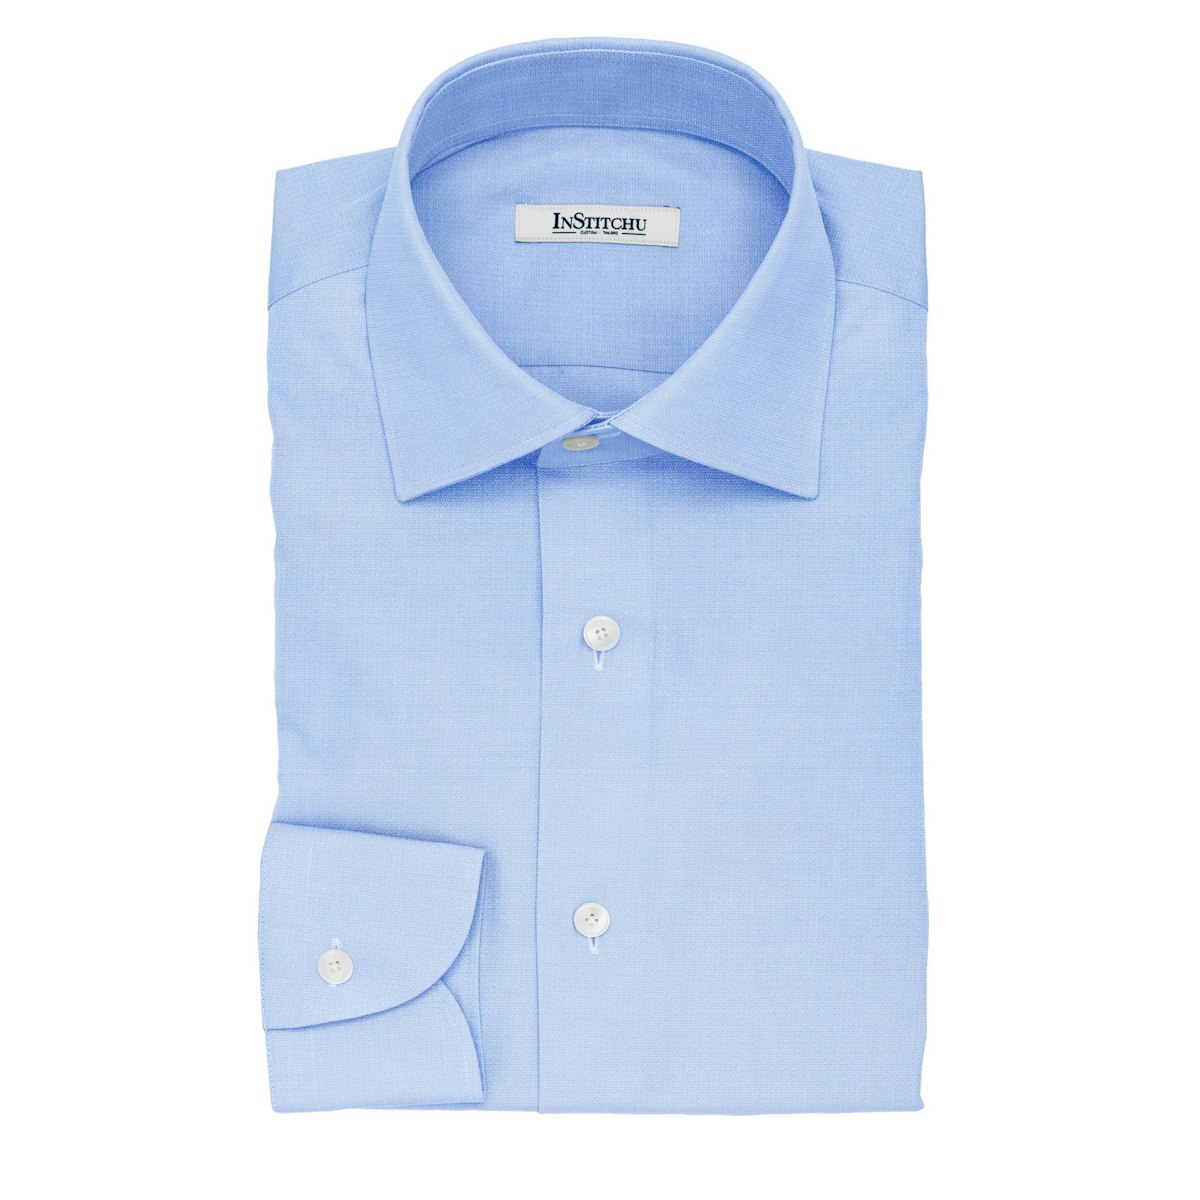 InStitchu Collection The Wordsworth Blue and White Herringbone Cotton Shirt